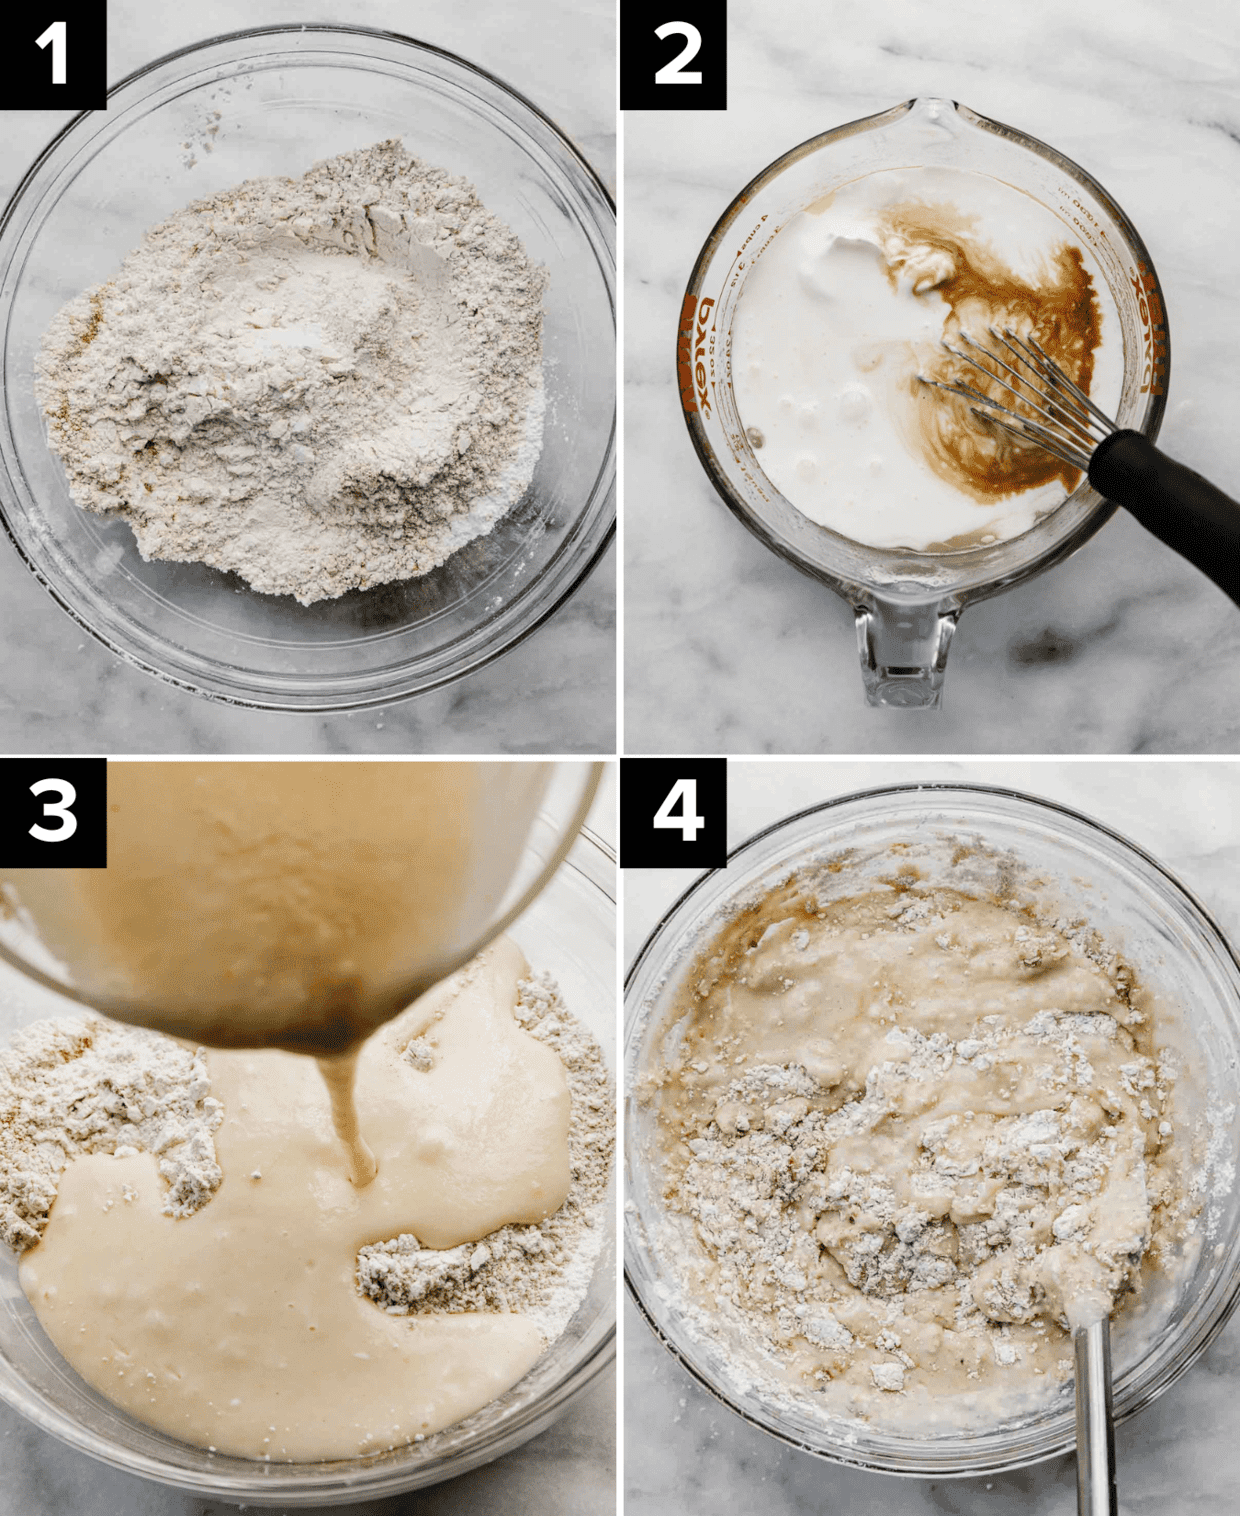 Four images showing the making of chocolate chip muffin batter in a glass bowl.